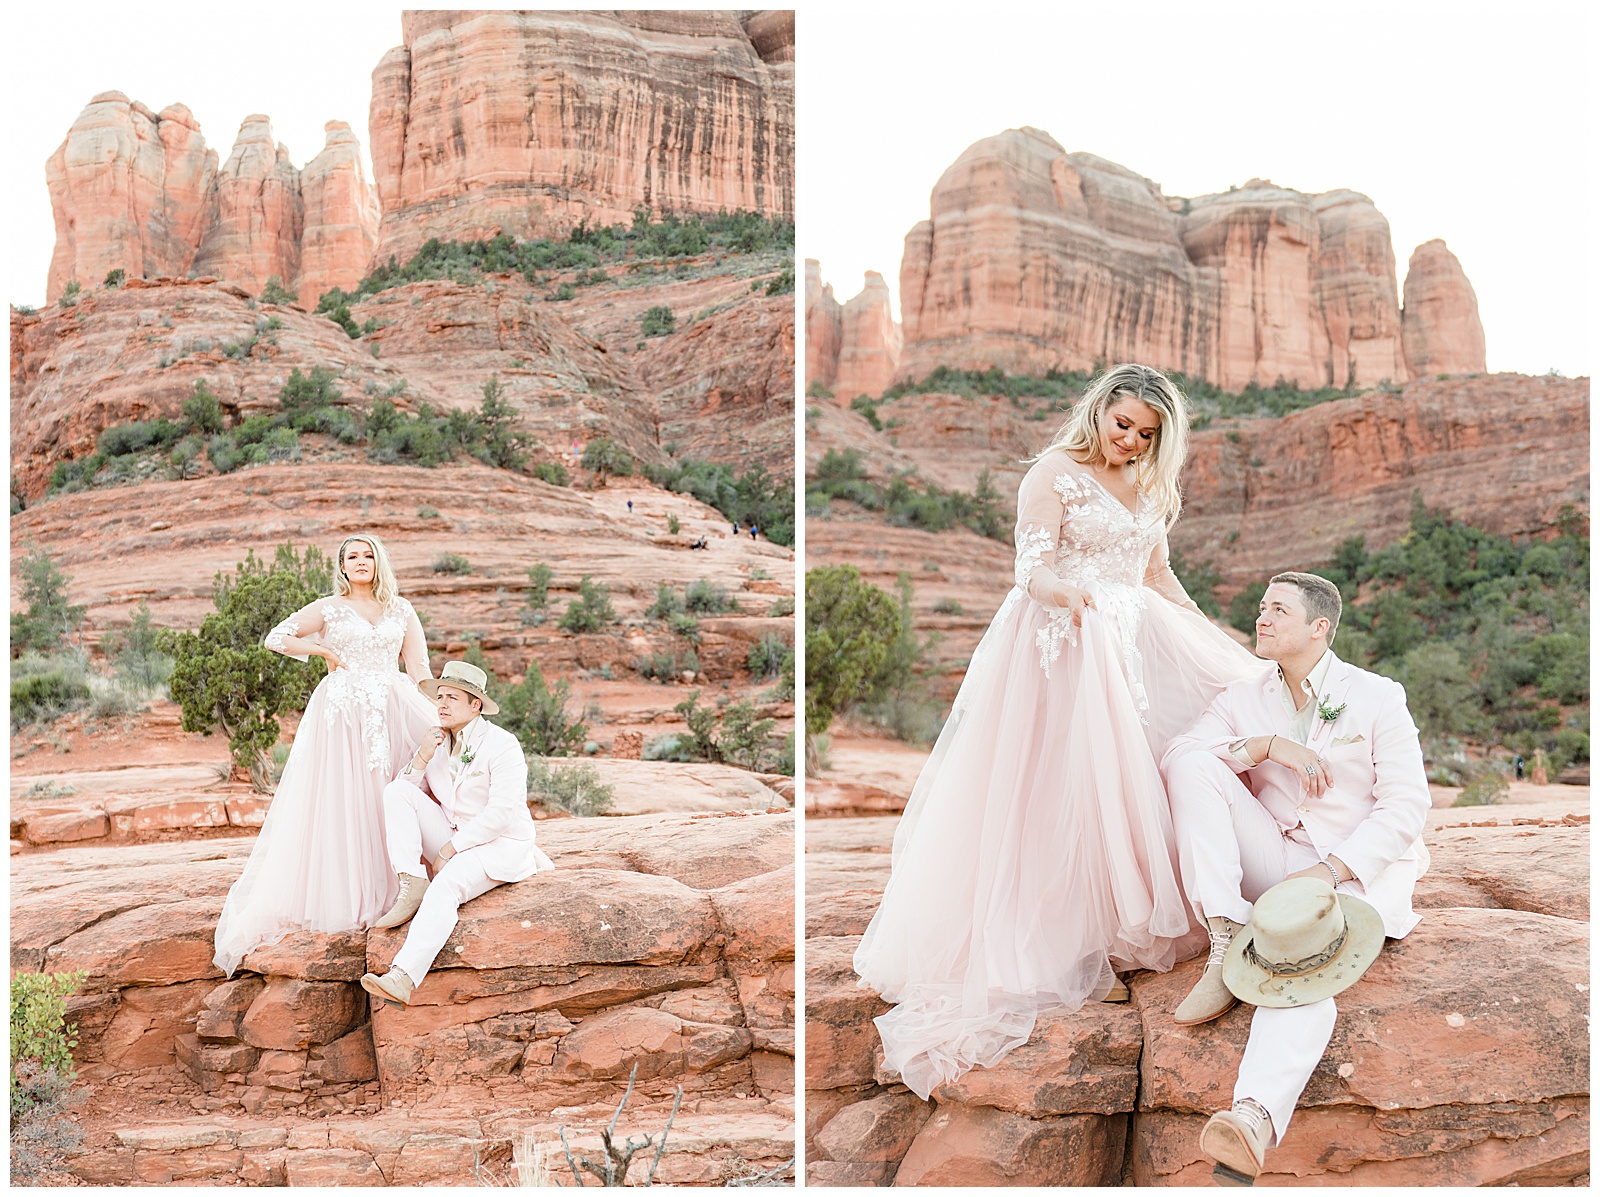 Groom sitting on red rocks with bride standing by his side